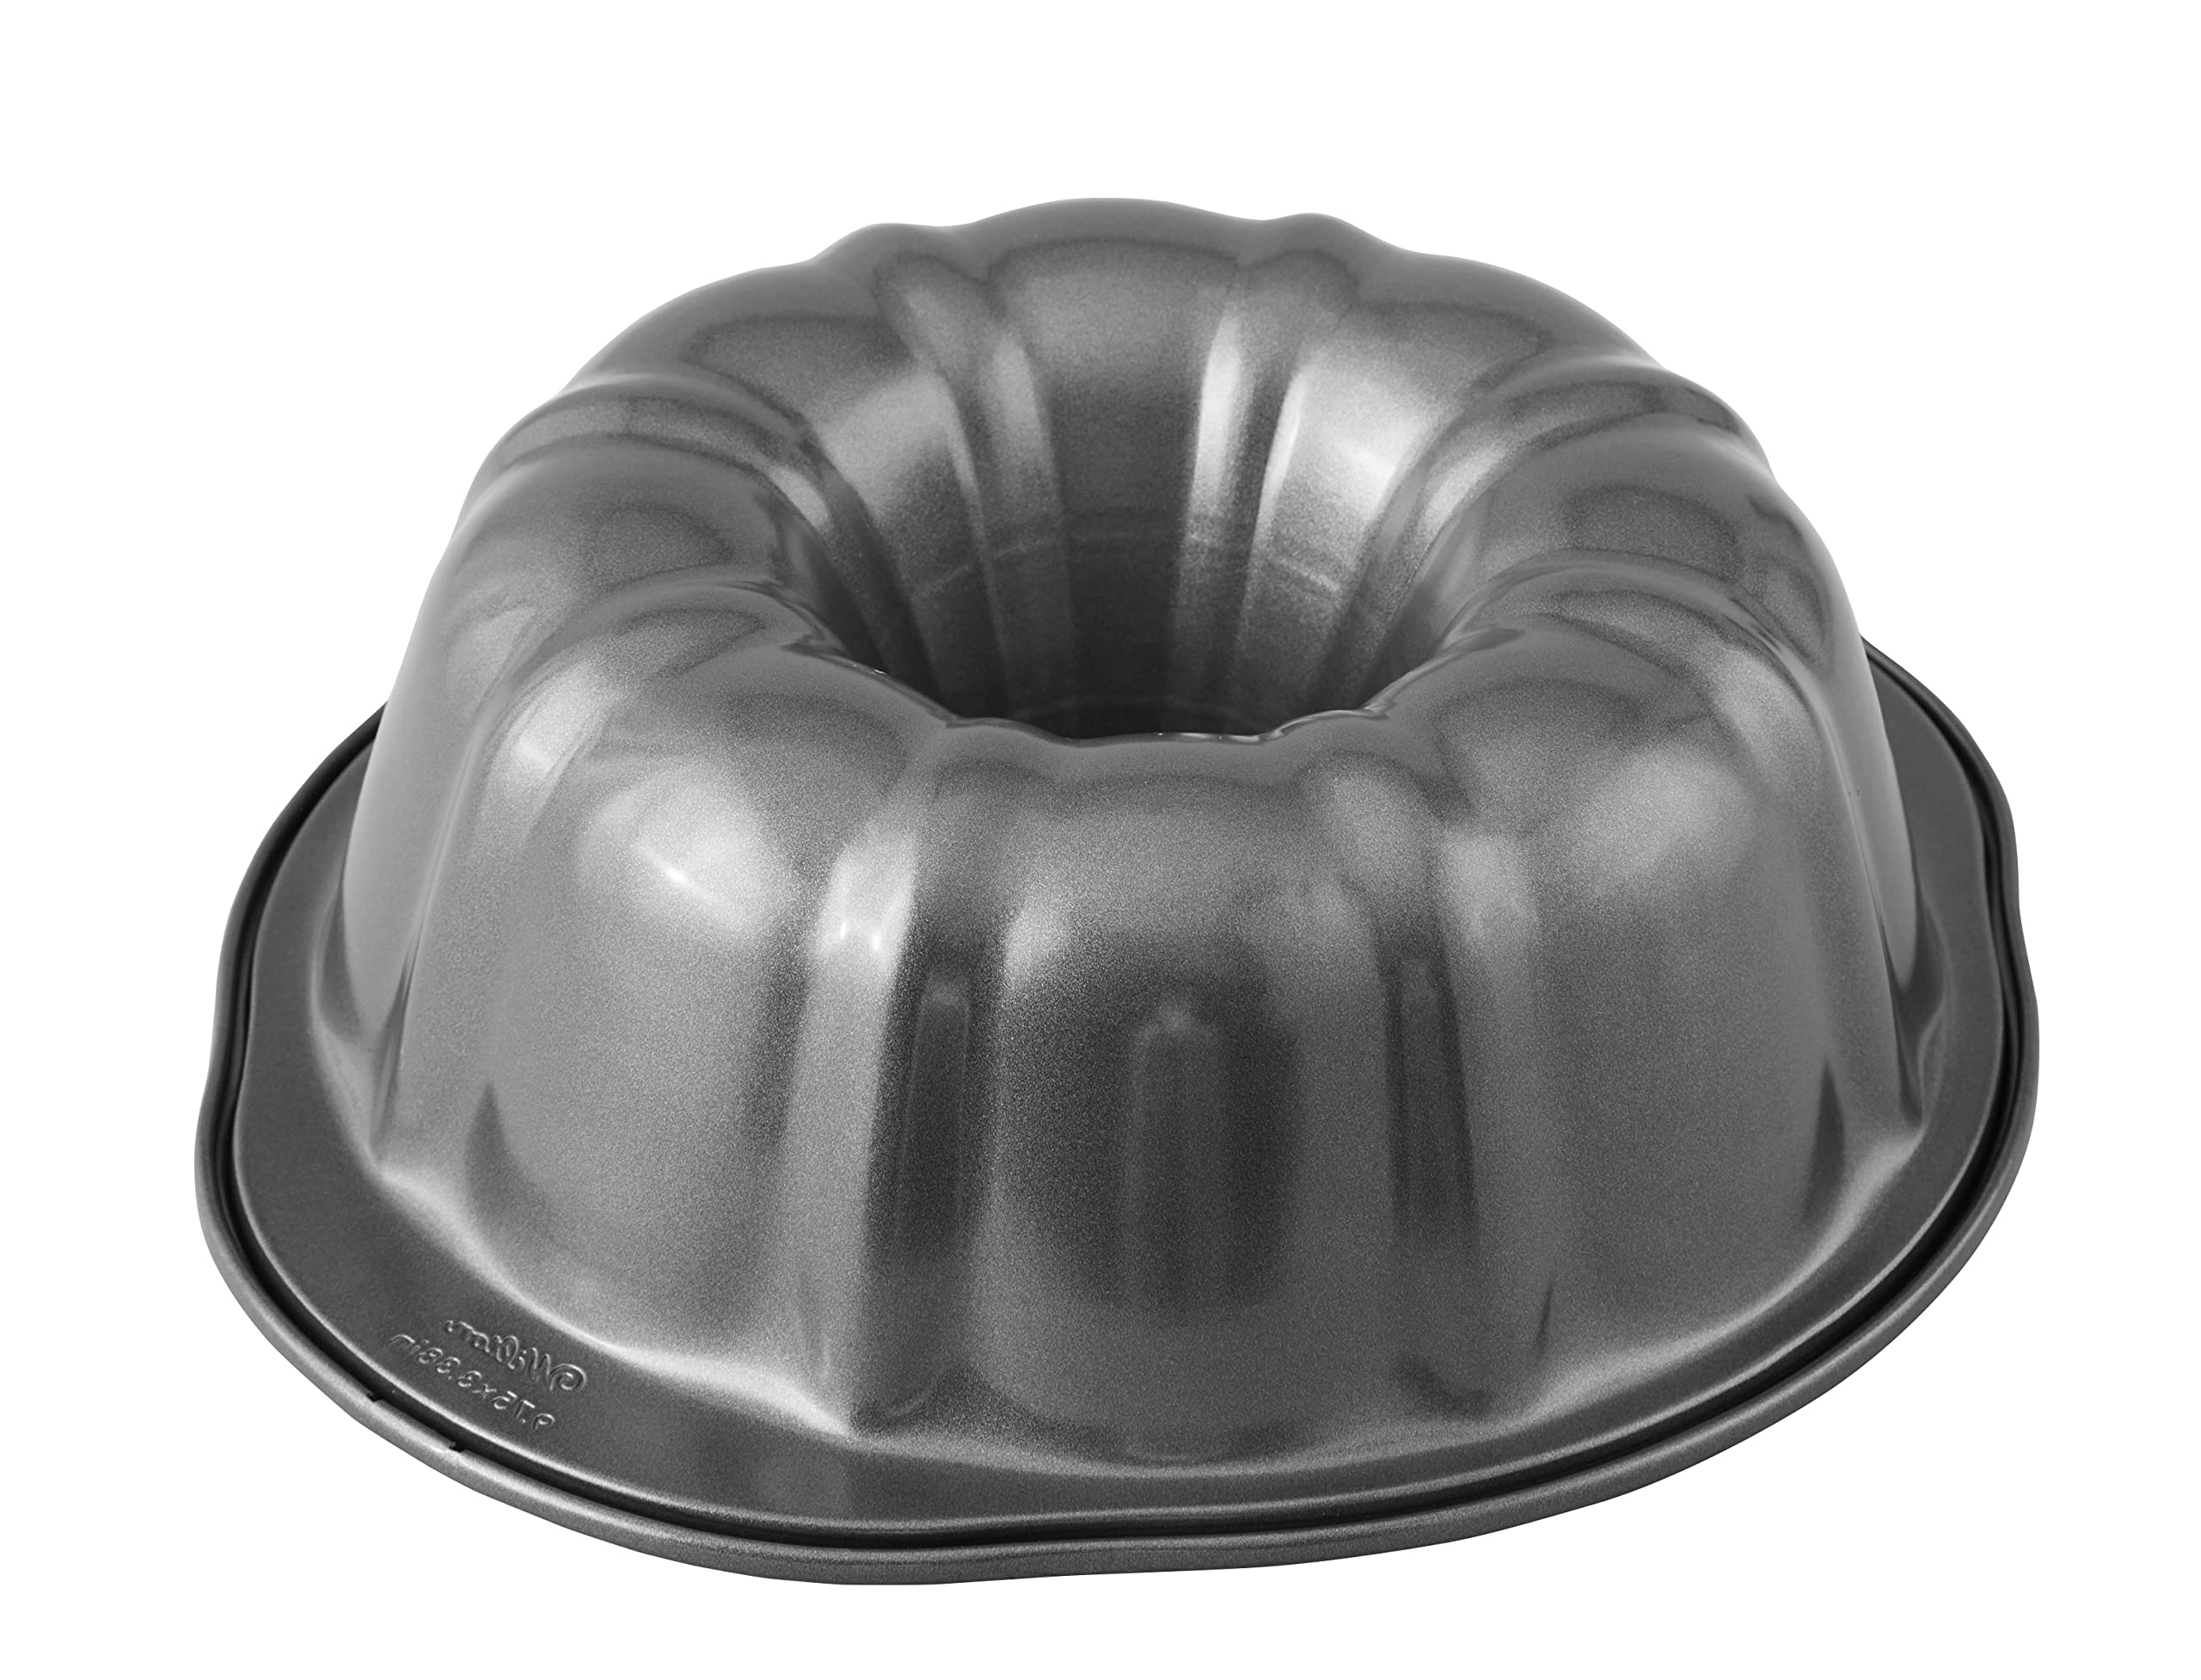 Wilton Perfect Results Premium Non-Stick 9.51-Inch Fluted Tube Pan, Steel Bundt Cake Pan